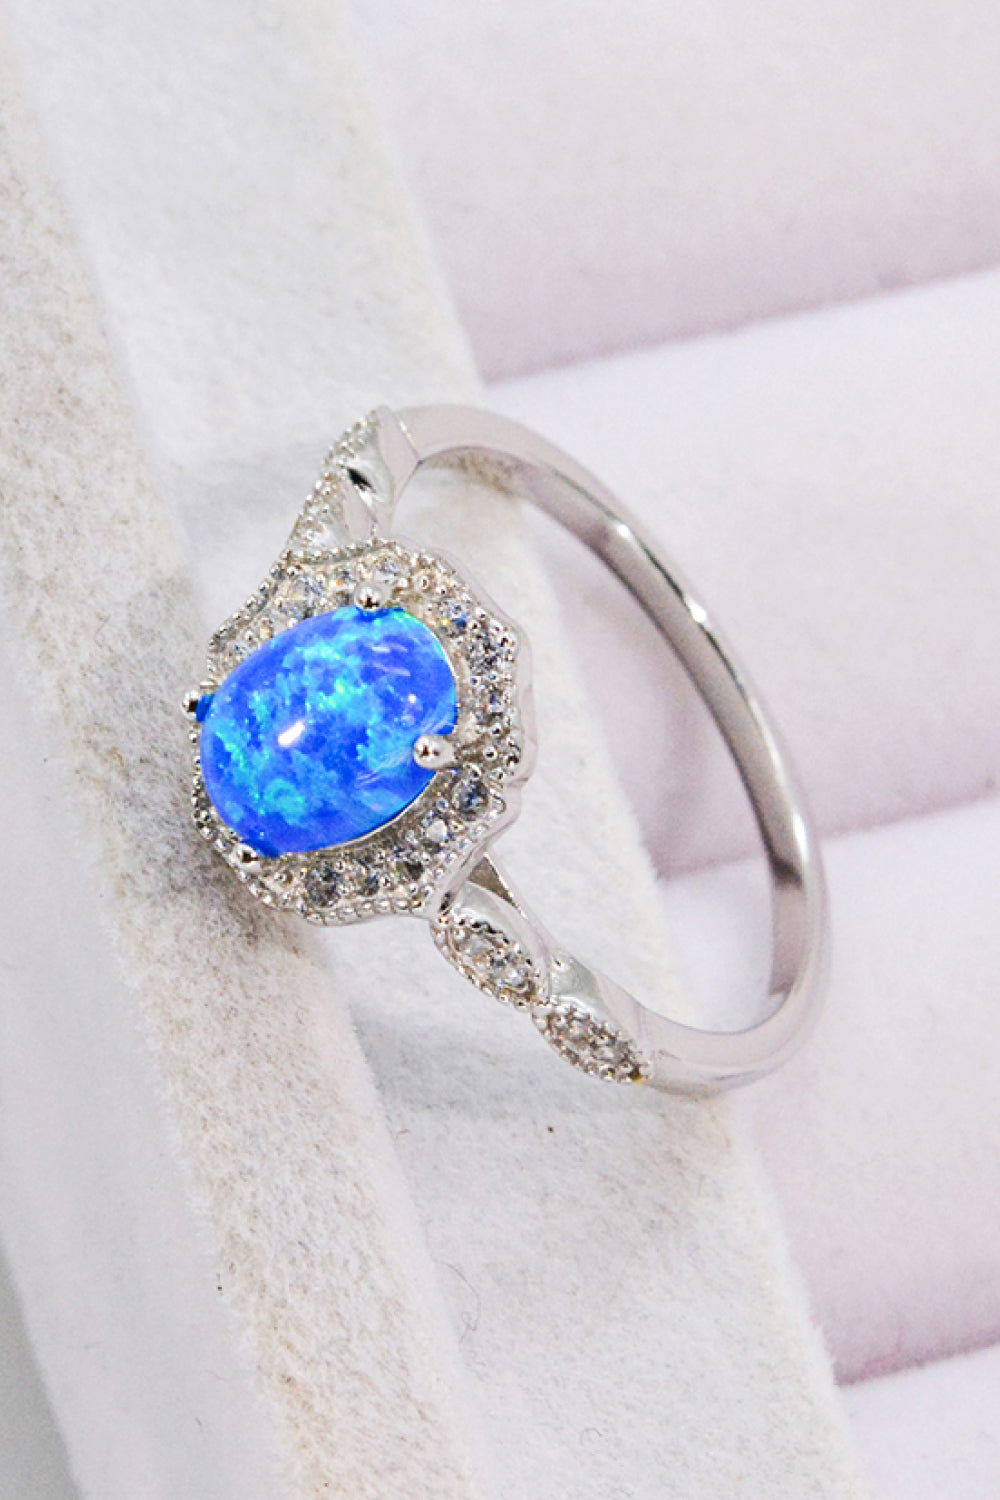 Opal and Zircon 925 Sterling Silver Ring - Tophatter Shopping Deals - Electronics, Jewelry, Auction, App, Bidding, Gadgets, Fashion